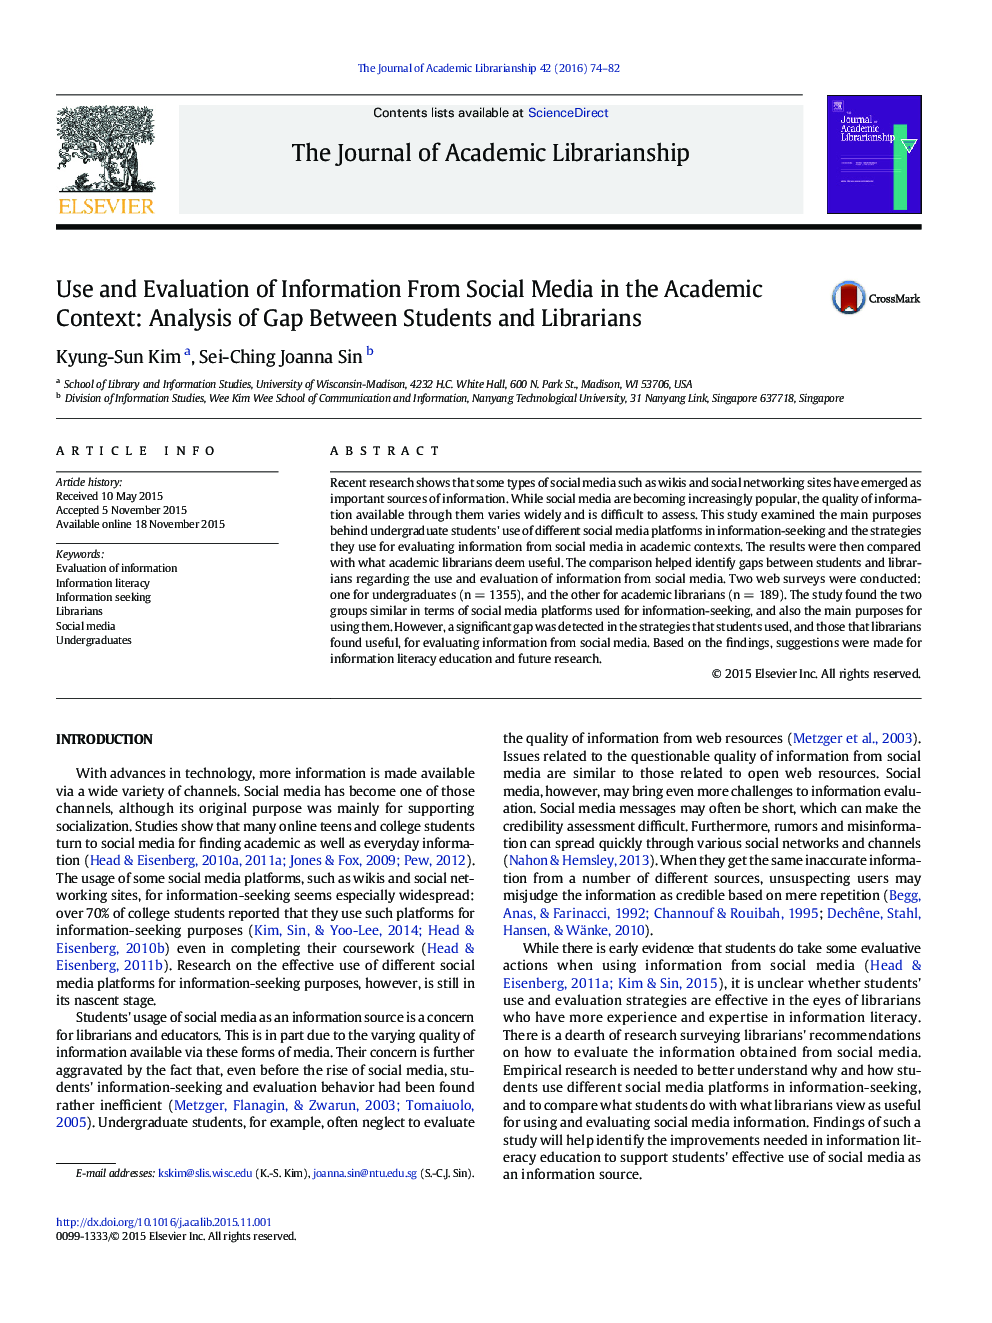 Use and Evaluation of Information From Social Media in the Academic Context: Analysis of Gap Between Students and Librarians